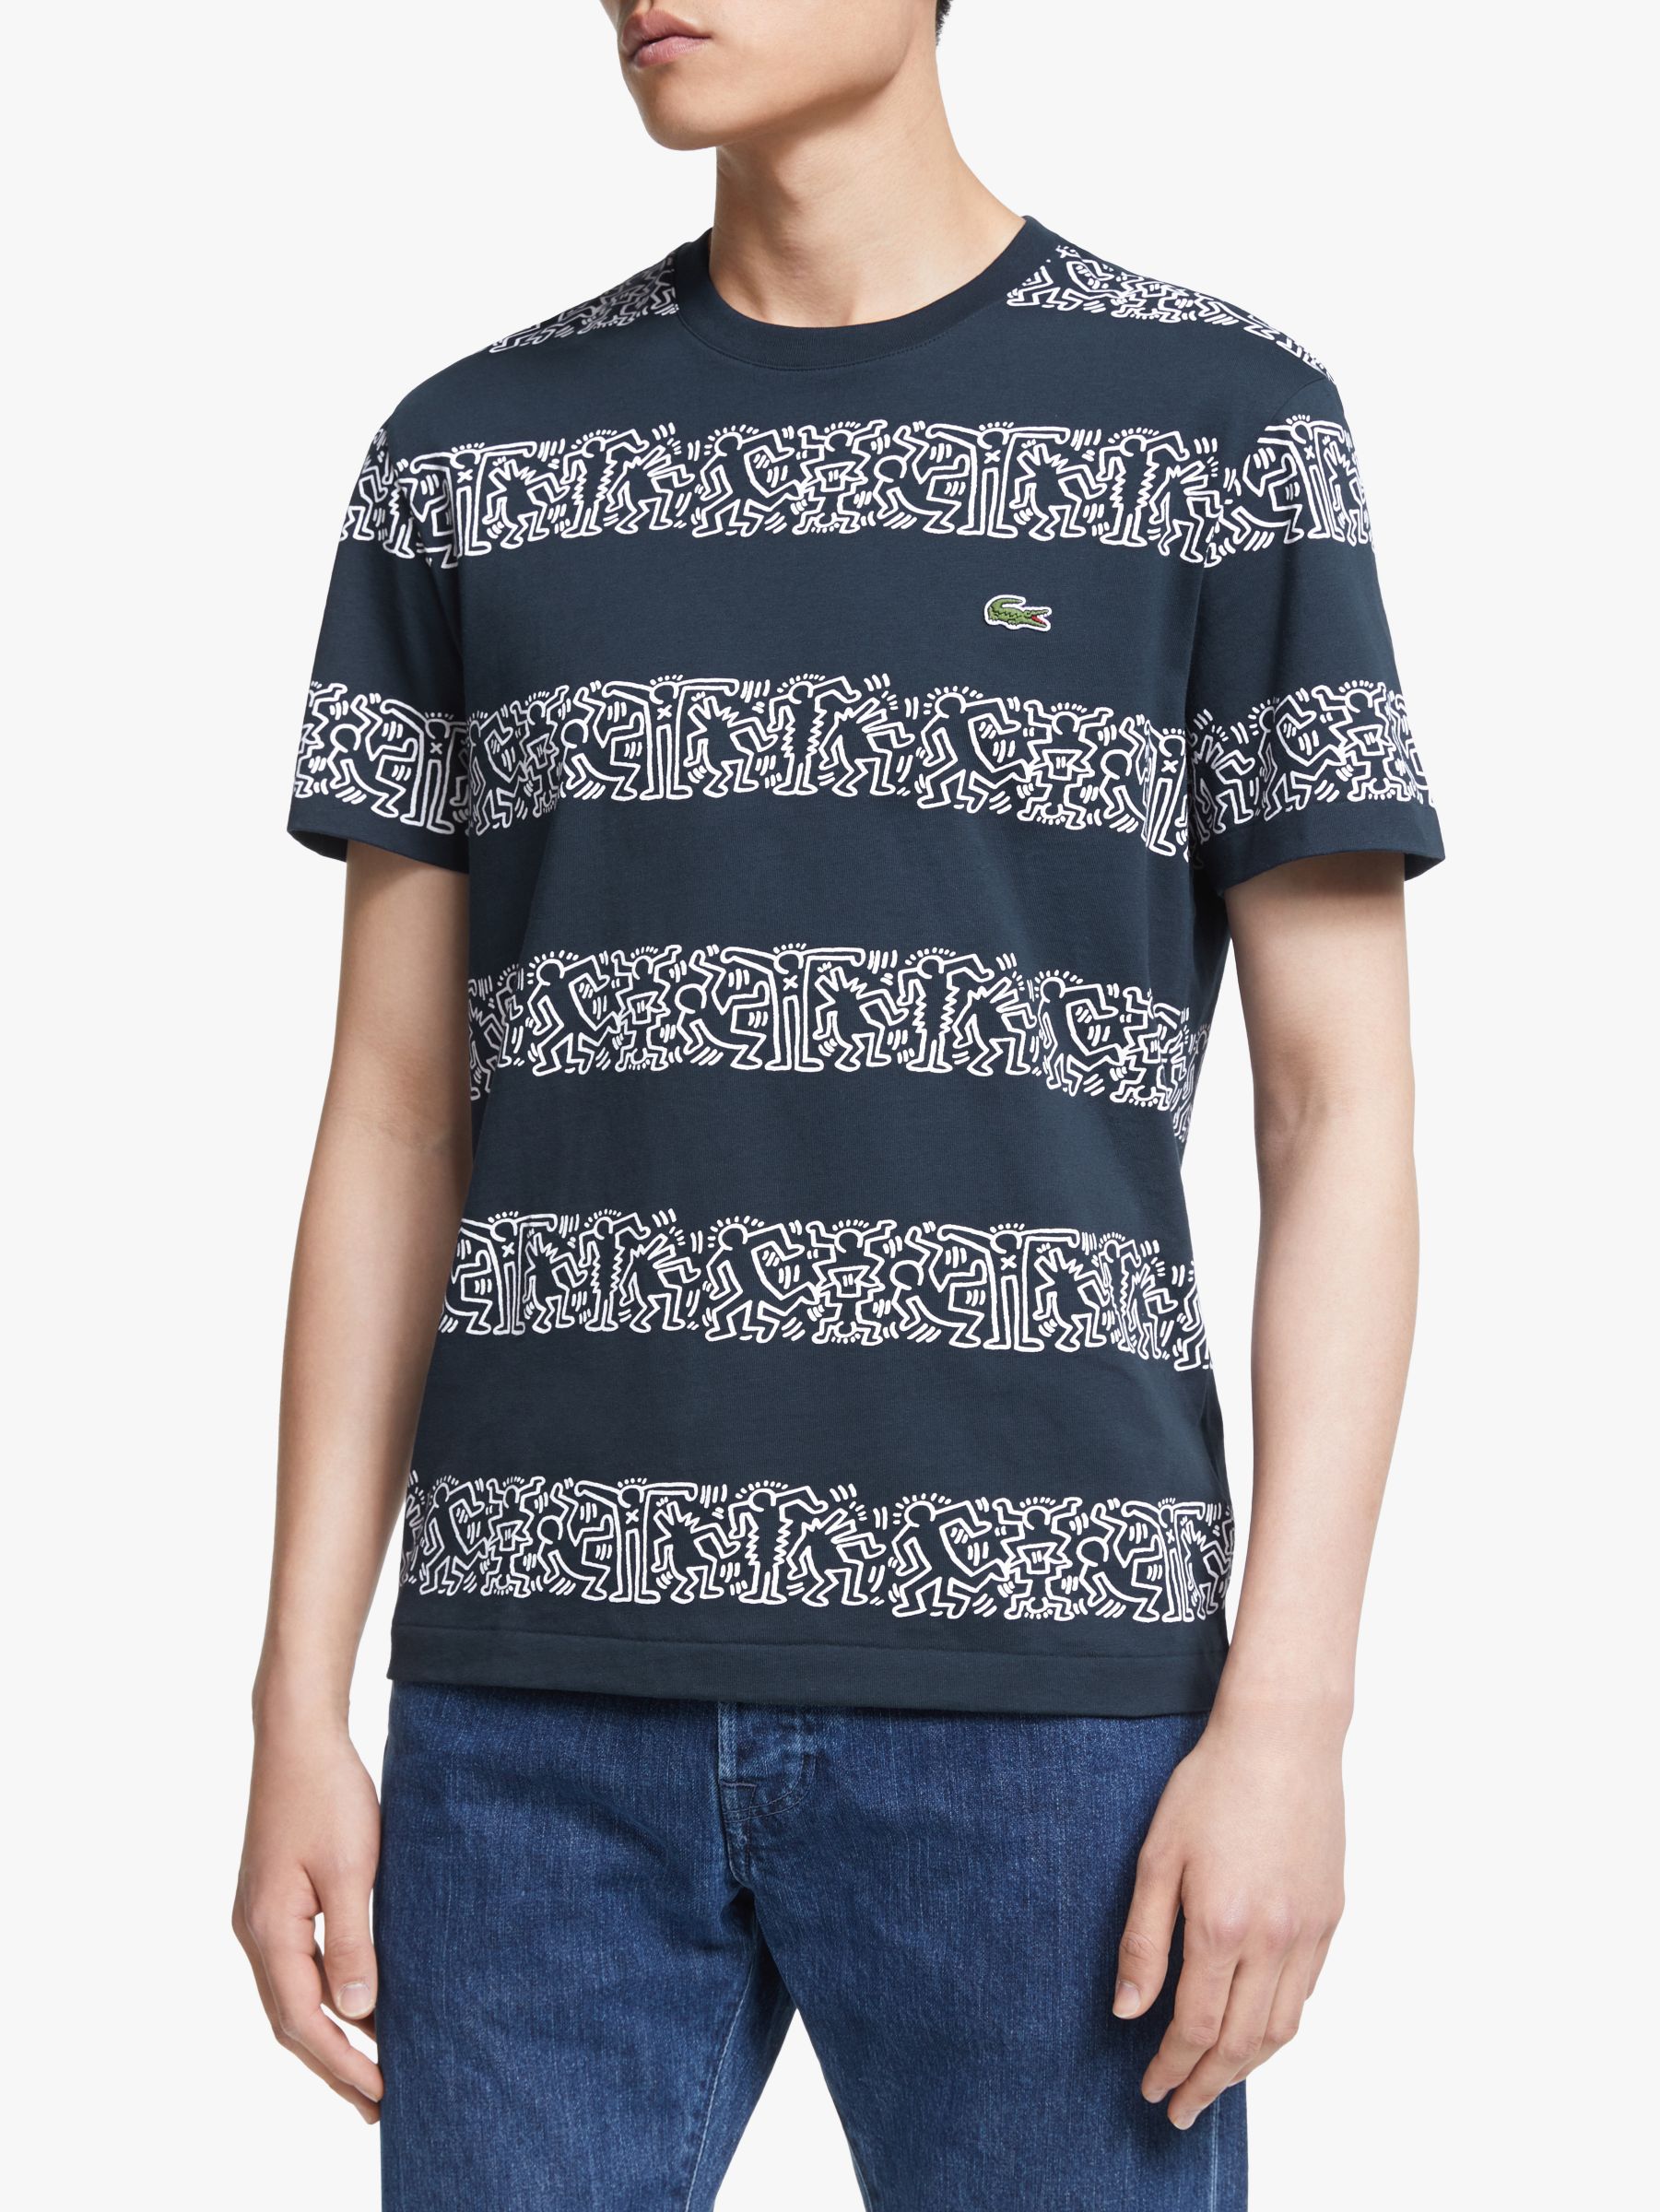 keith haring shirt lacoste